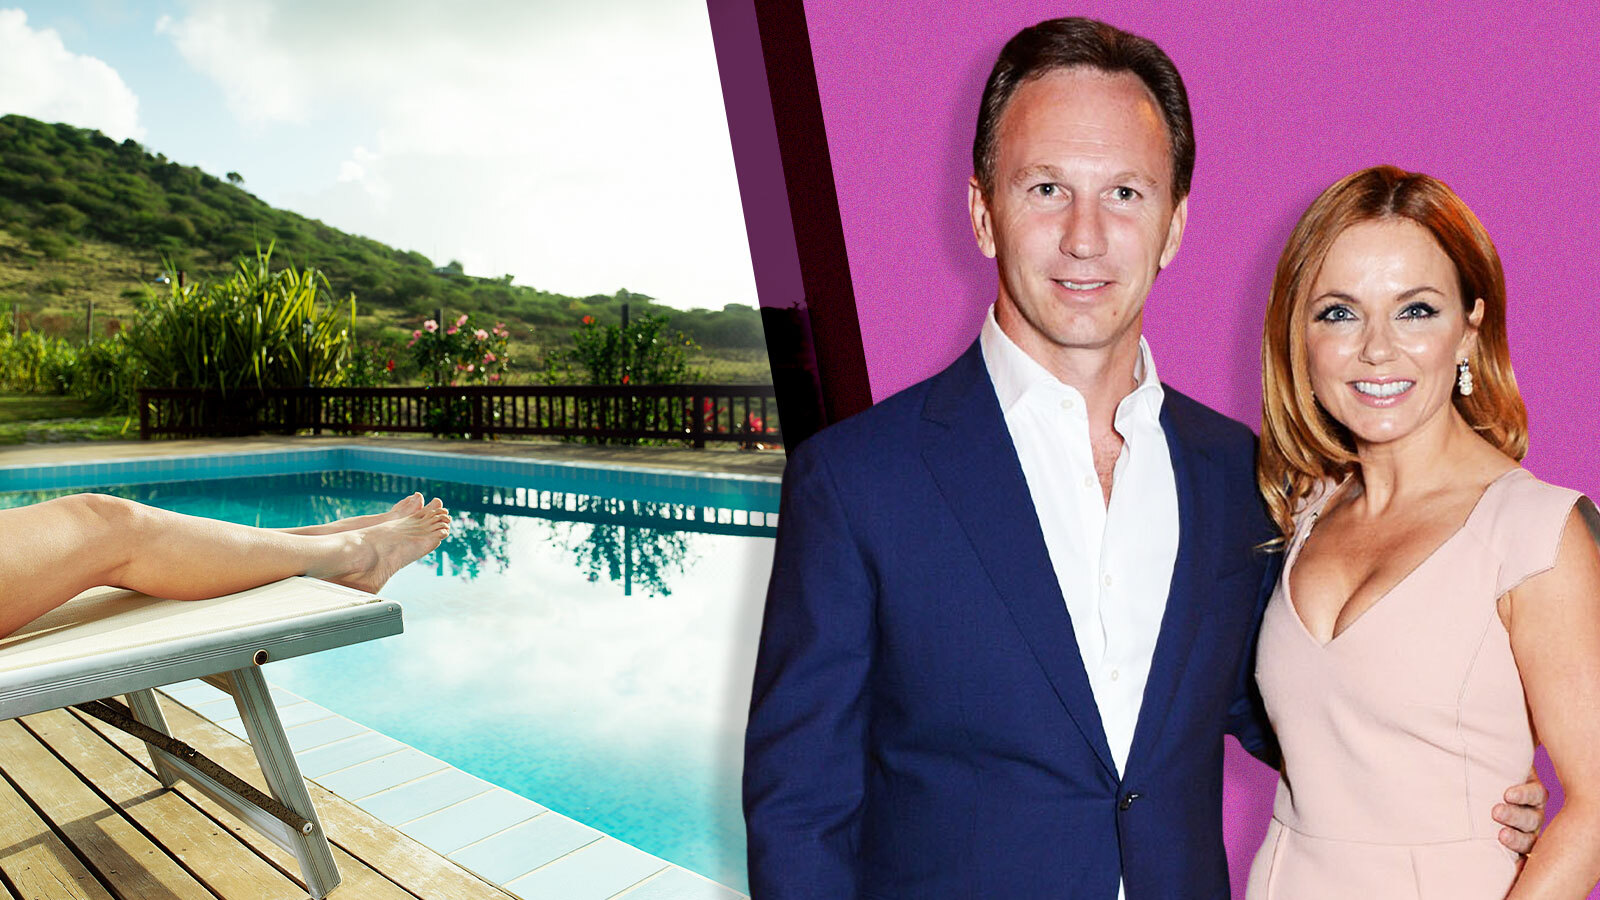 Christian and Geri Horner are the latest celebrities to get into a swimming pool war